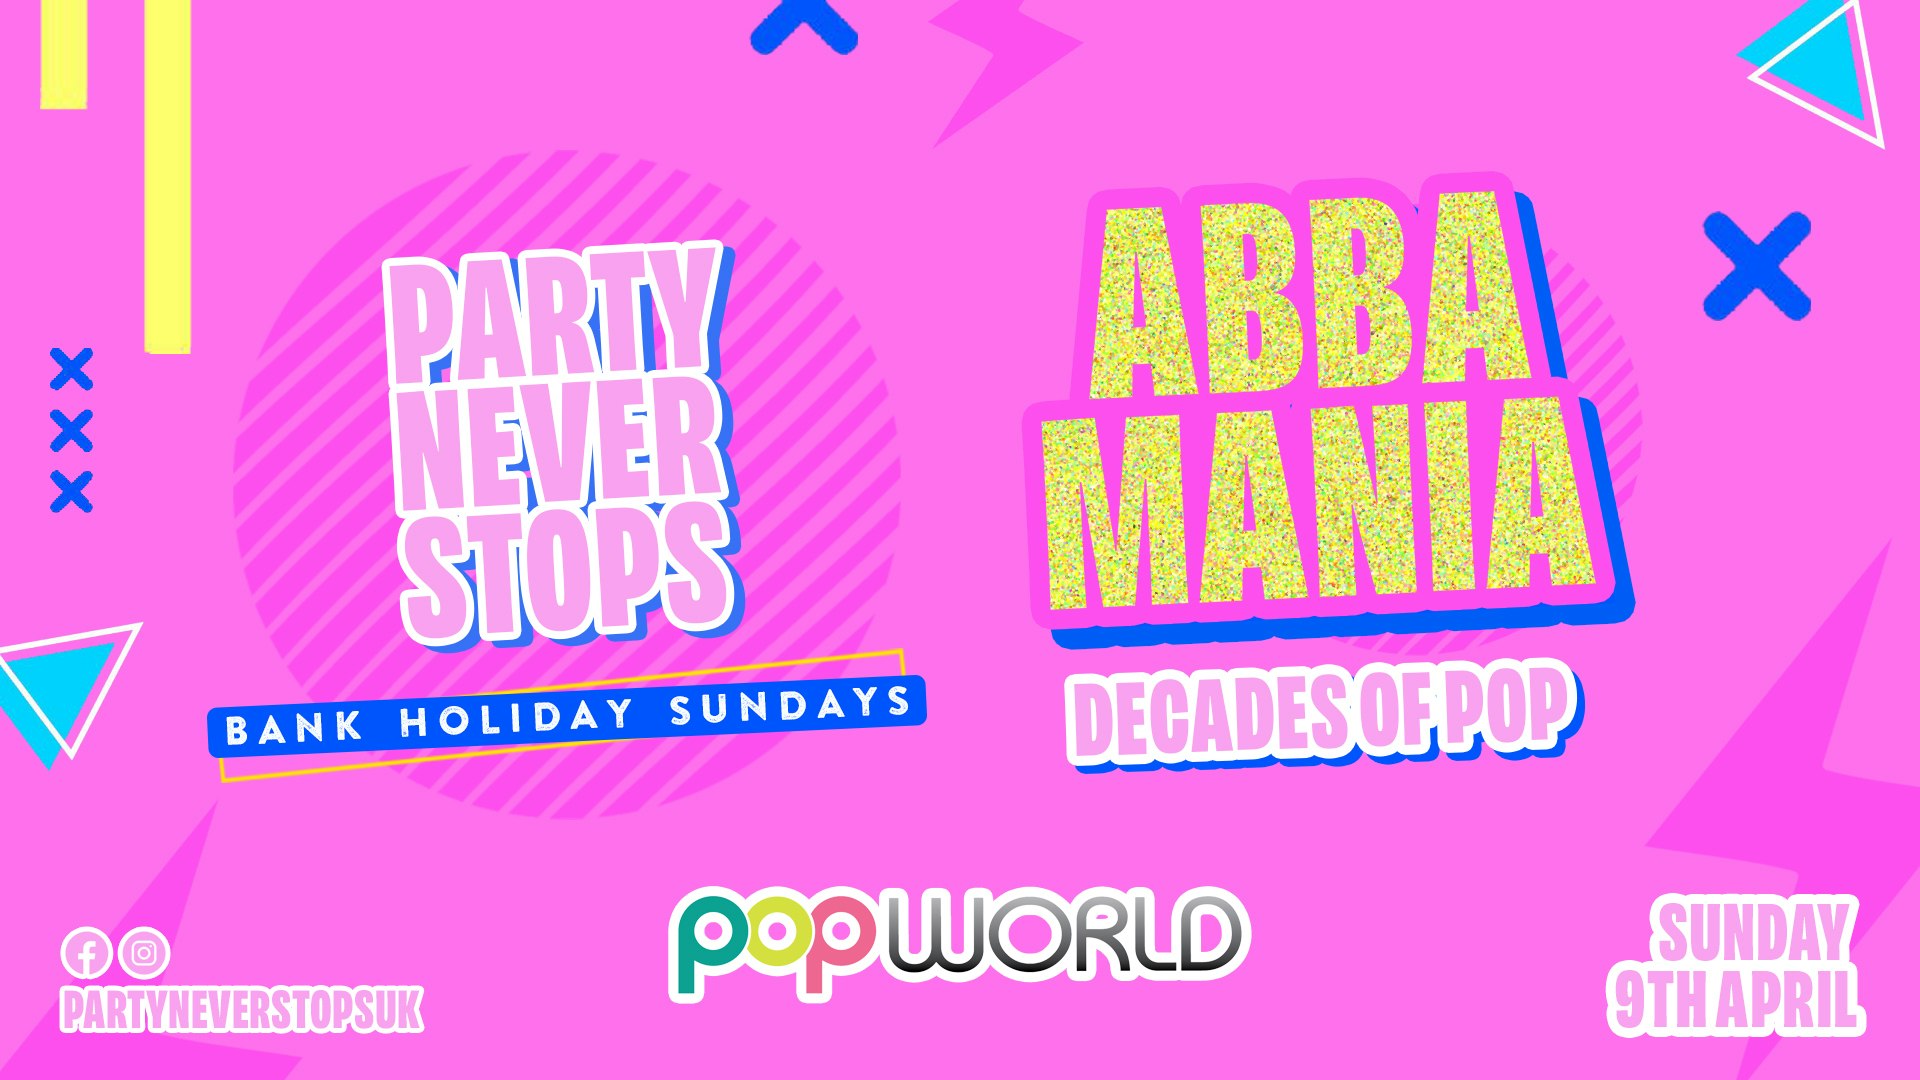 Party Never Stops ➤ ABBA Mania ➤ Bank Holiday Sunday Special